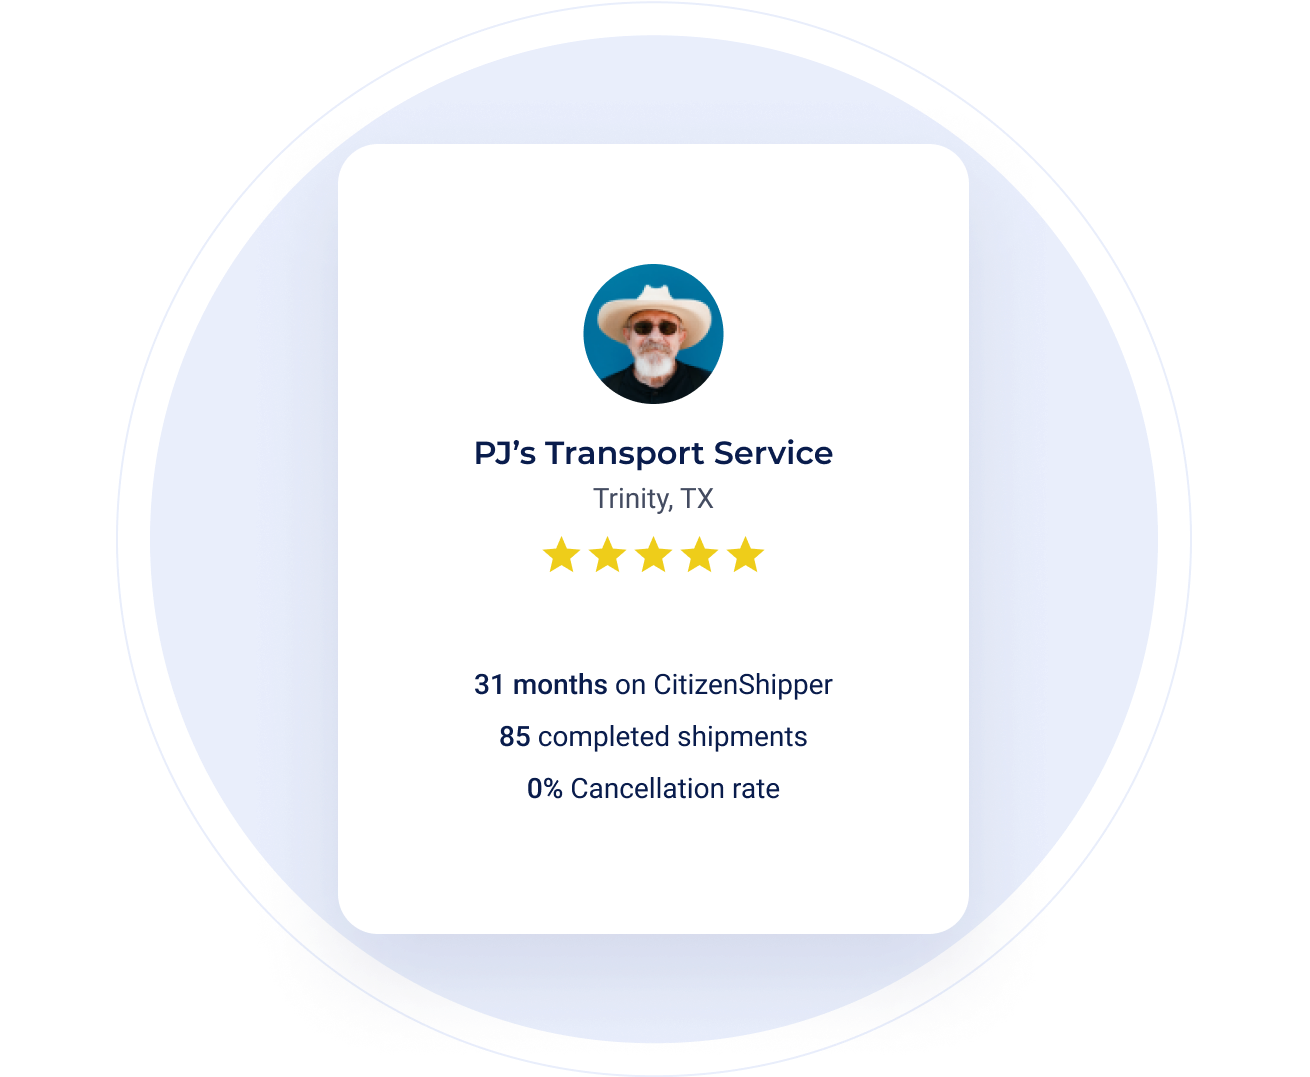 Professional service profile card with ratings and reliability details for PJ's transport service on CitizenShipper.